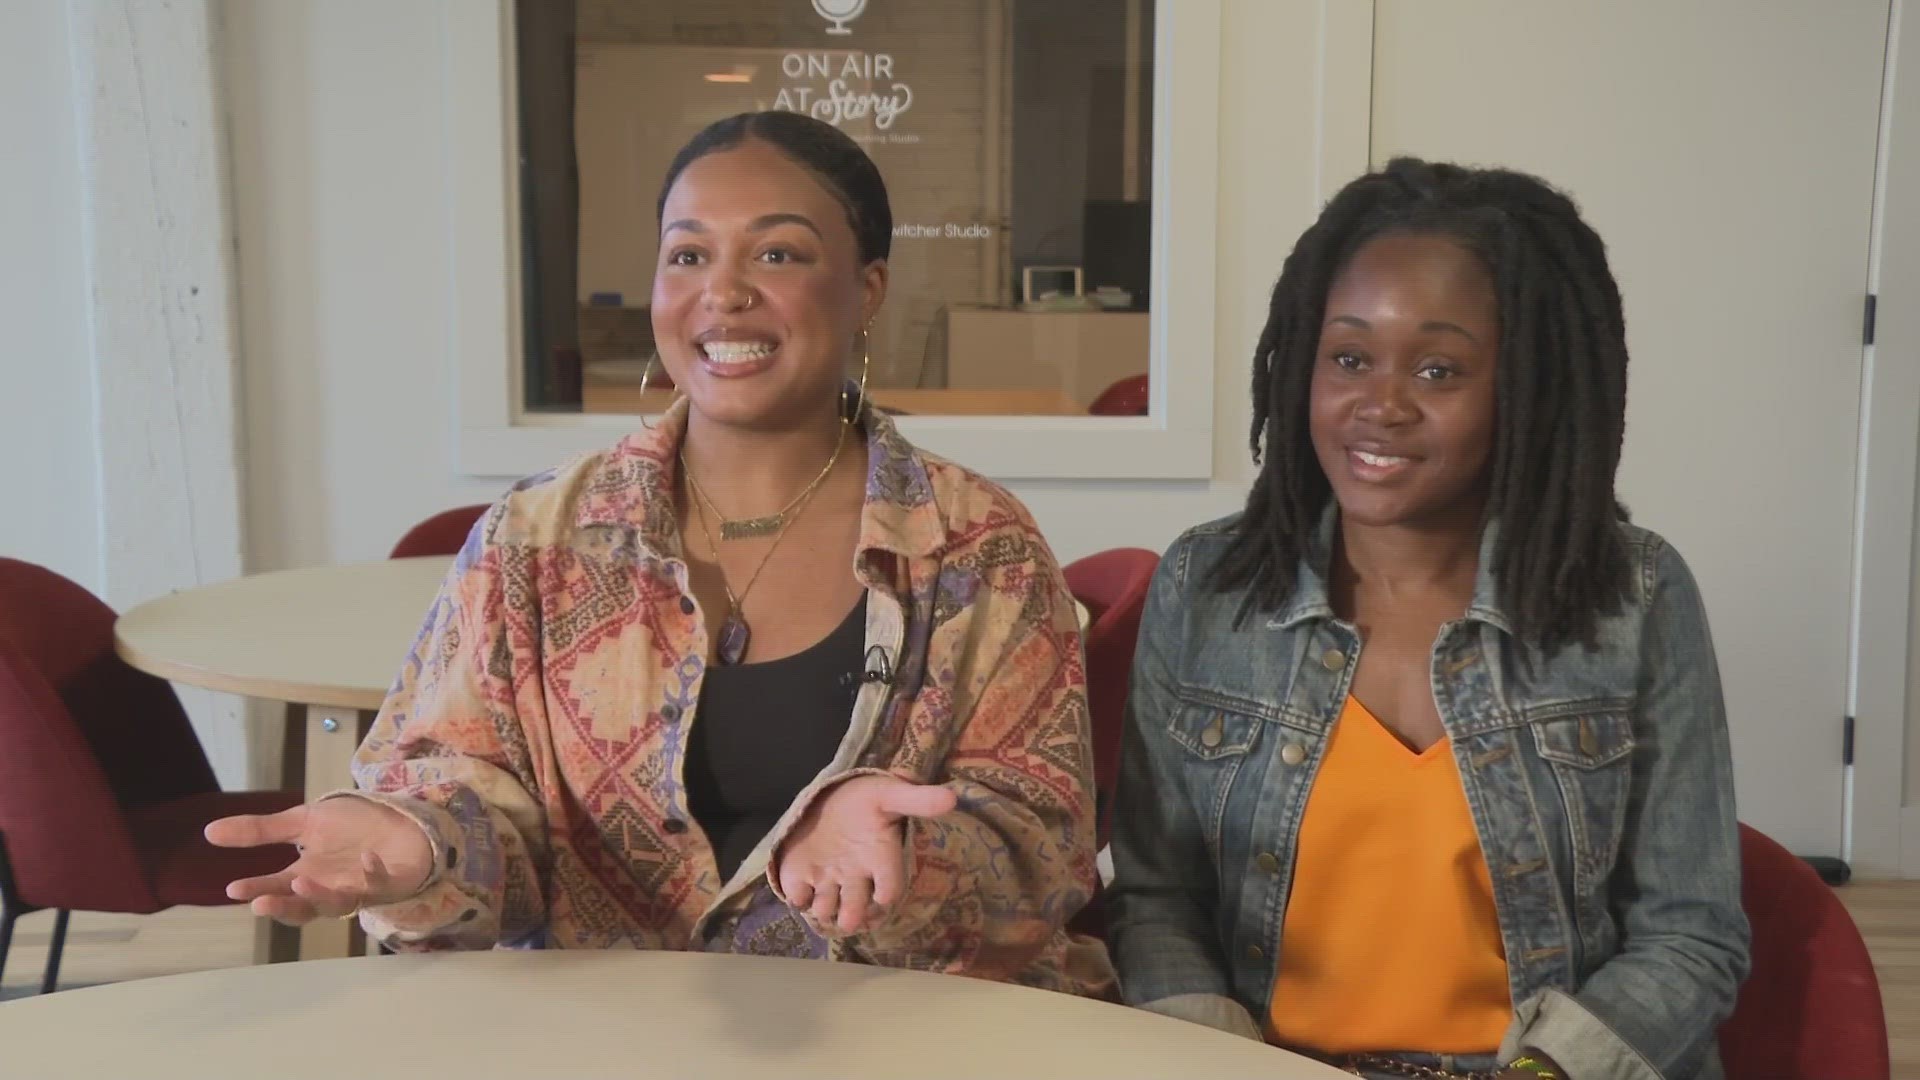 Wild is designed to provide training and mentorship to Black and Latinx woman founders in Louisville.